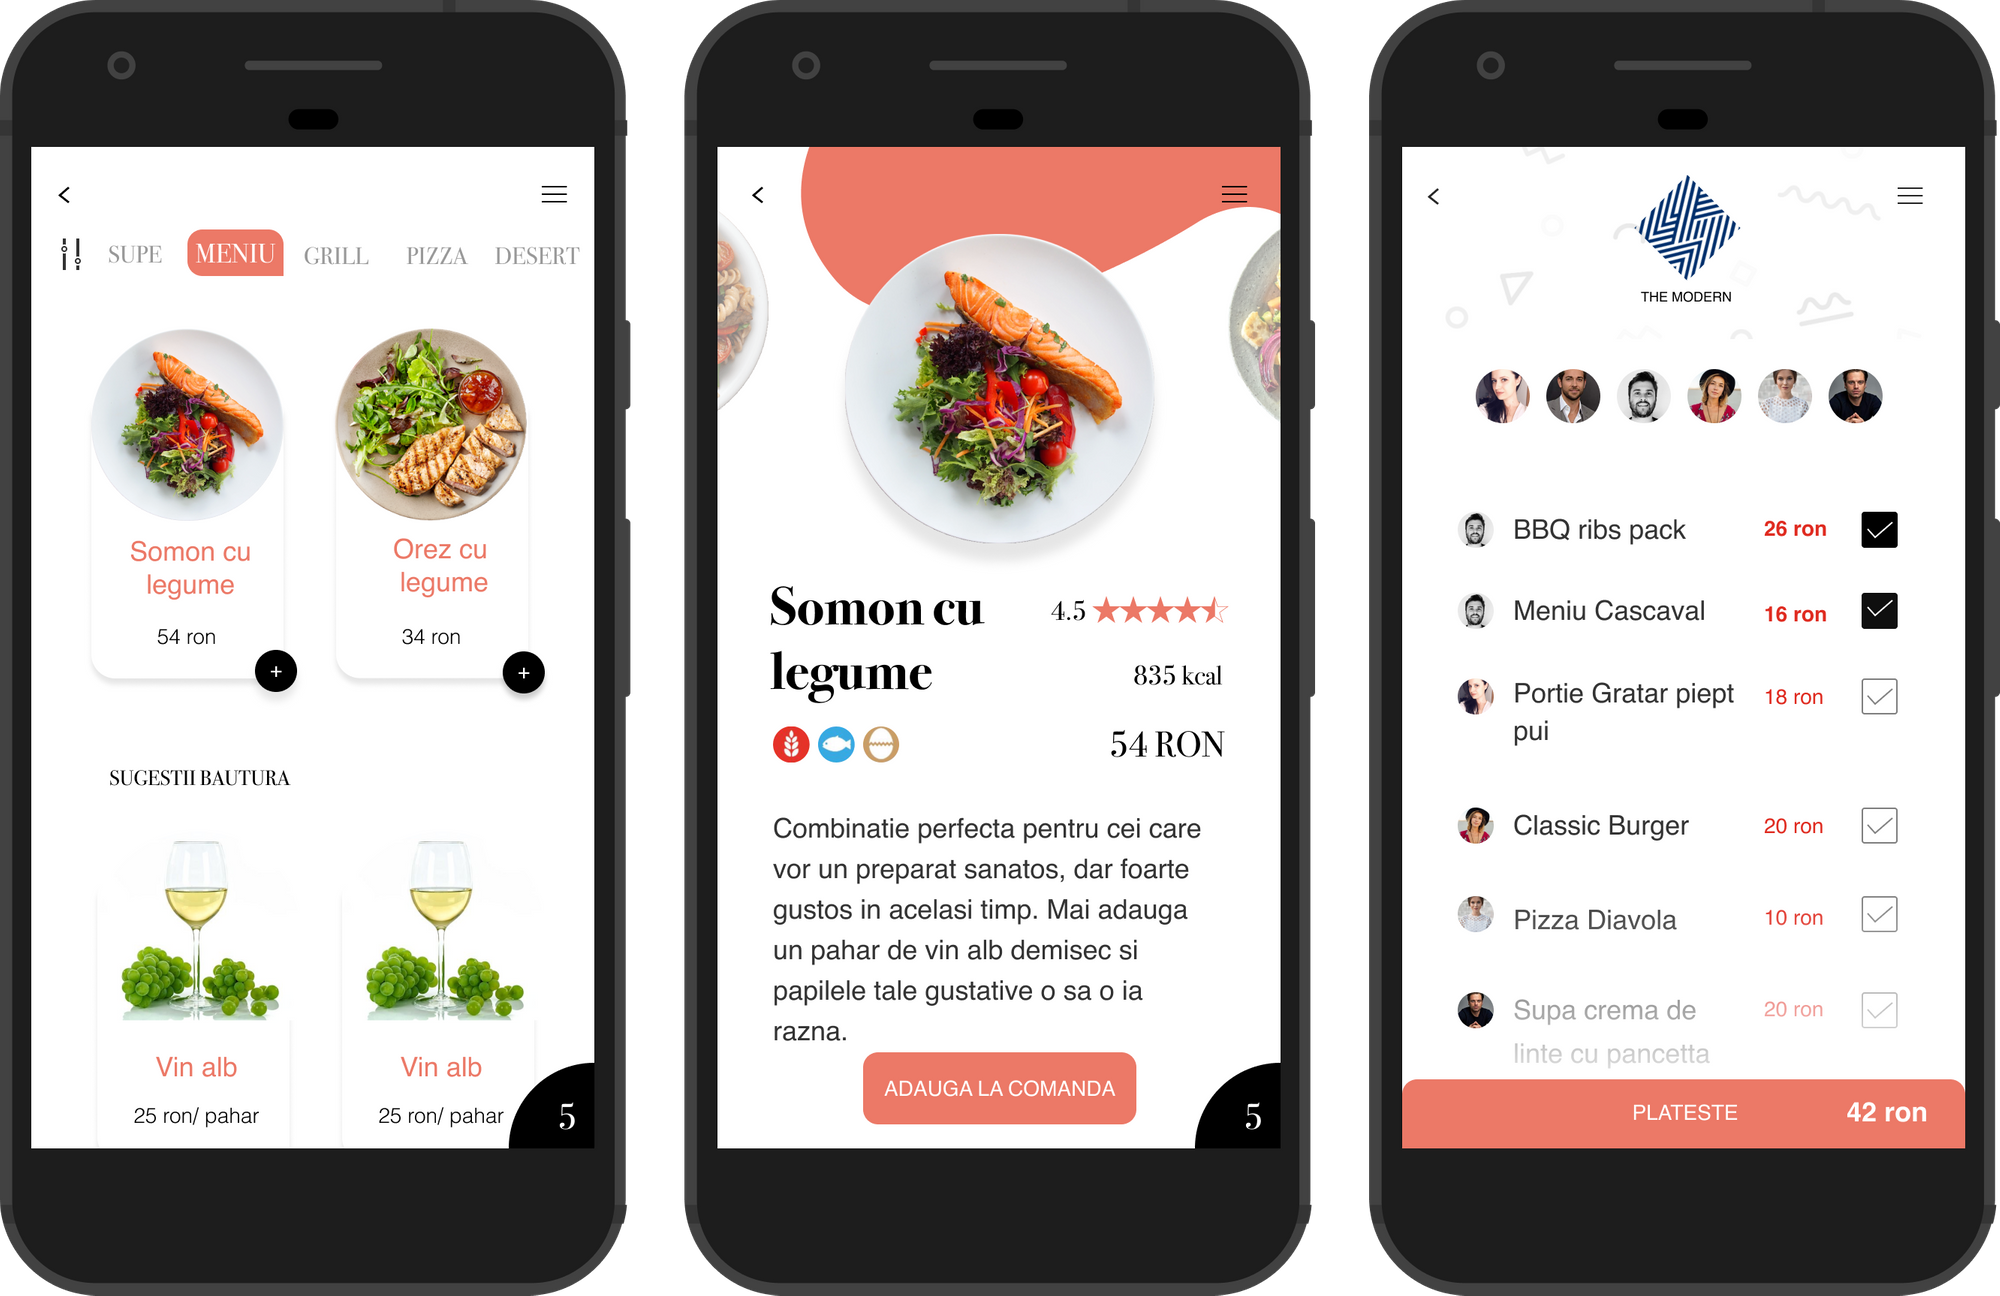 Why a mobile app for ordering and paying in restaurants is not a good business idea